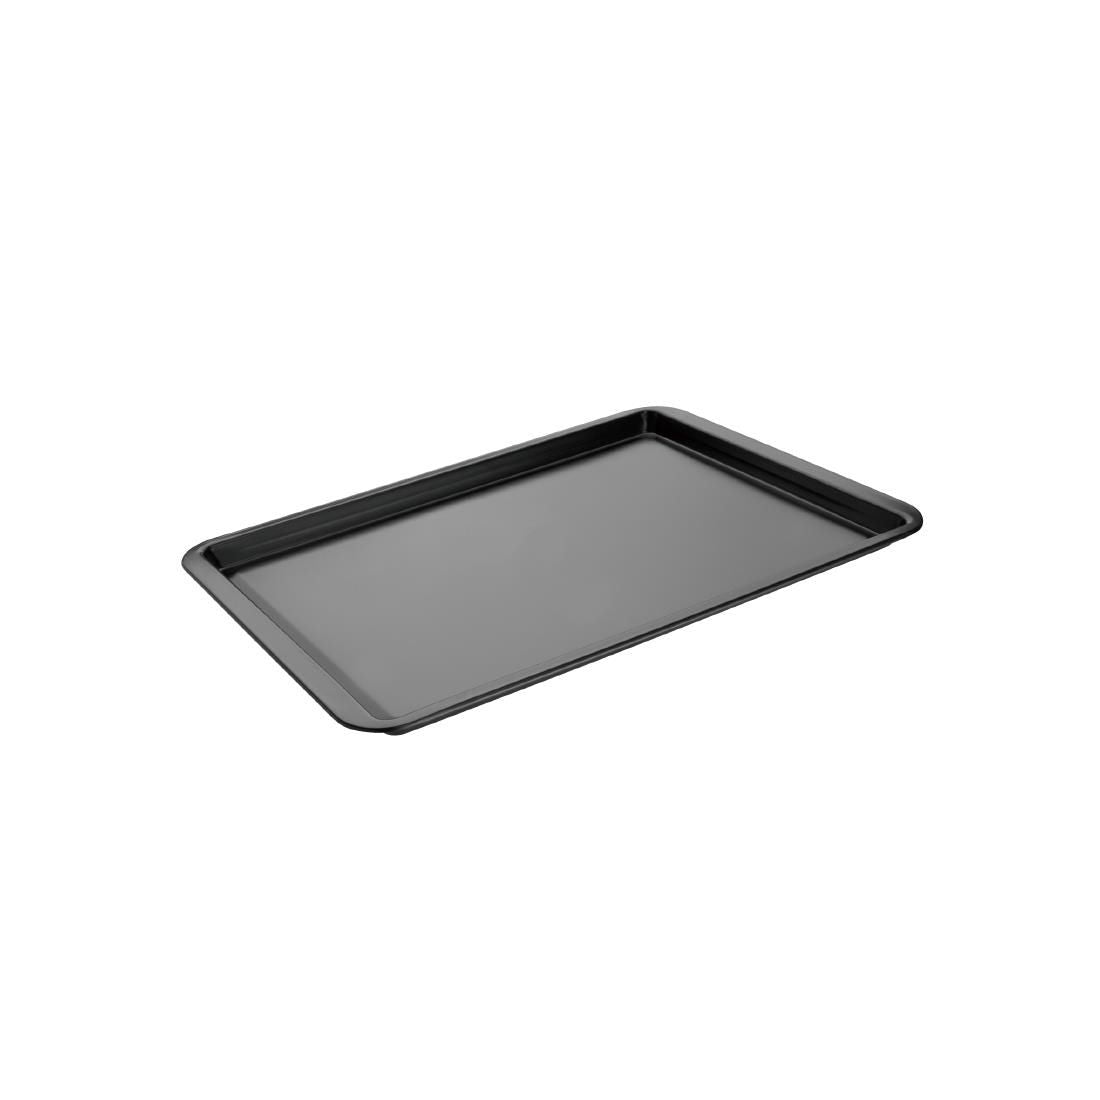 GD014 Vogue Non-Stick Carbon Steel Baking Tray 370 x 257mm JD Catering Equipment Solutions Ltd